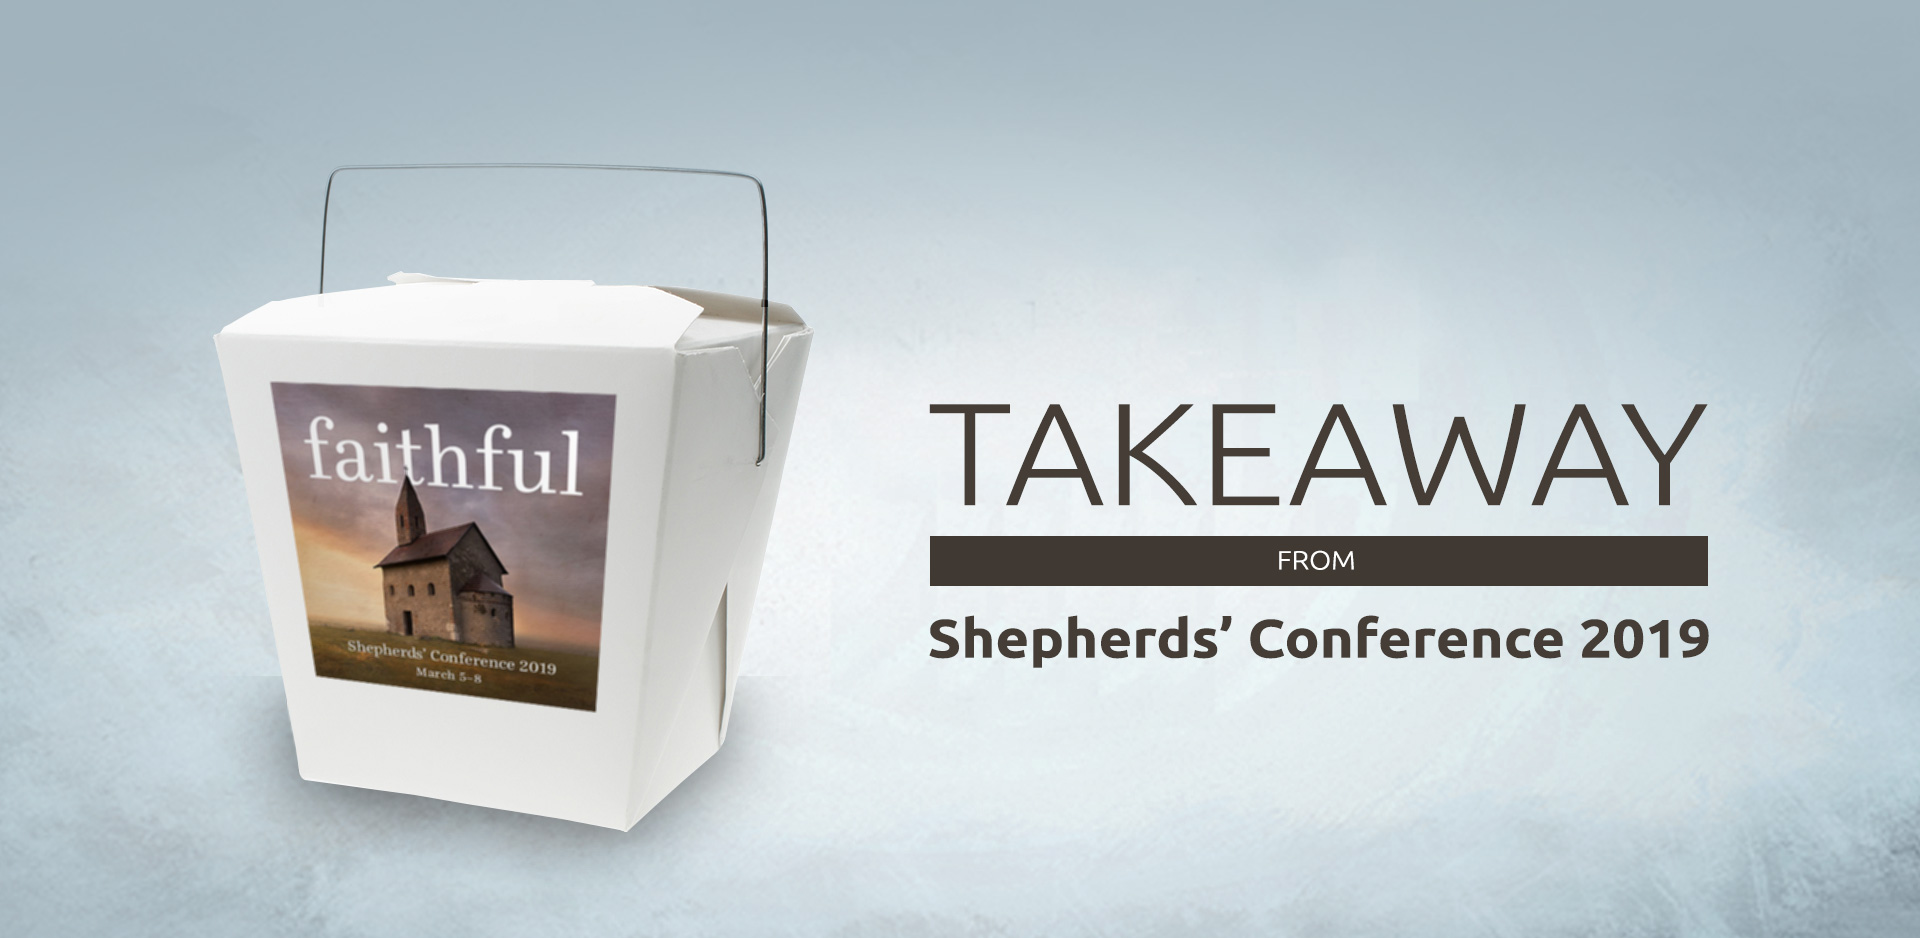 Blog Post Takeaway from Shepherds’ Conference 2019